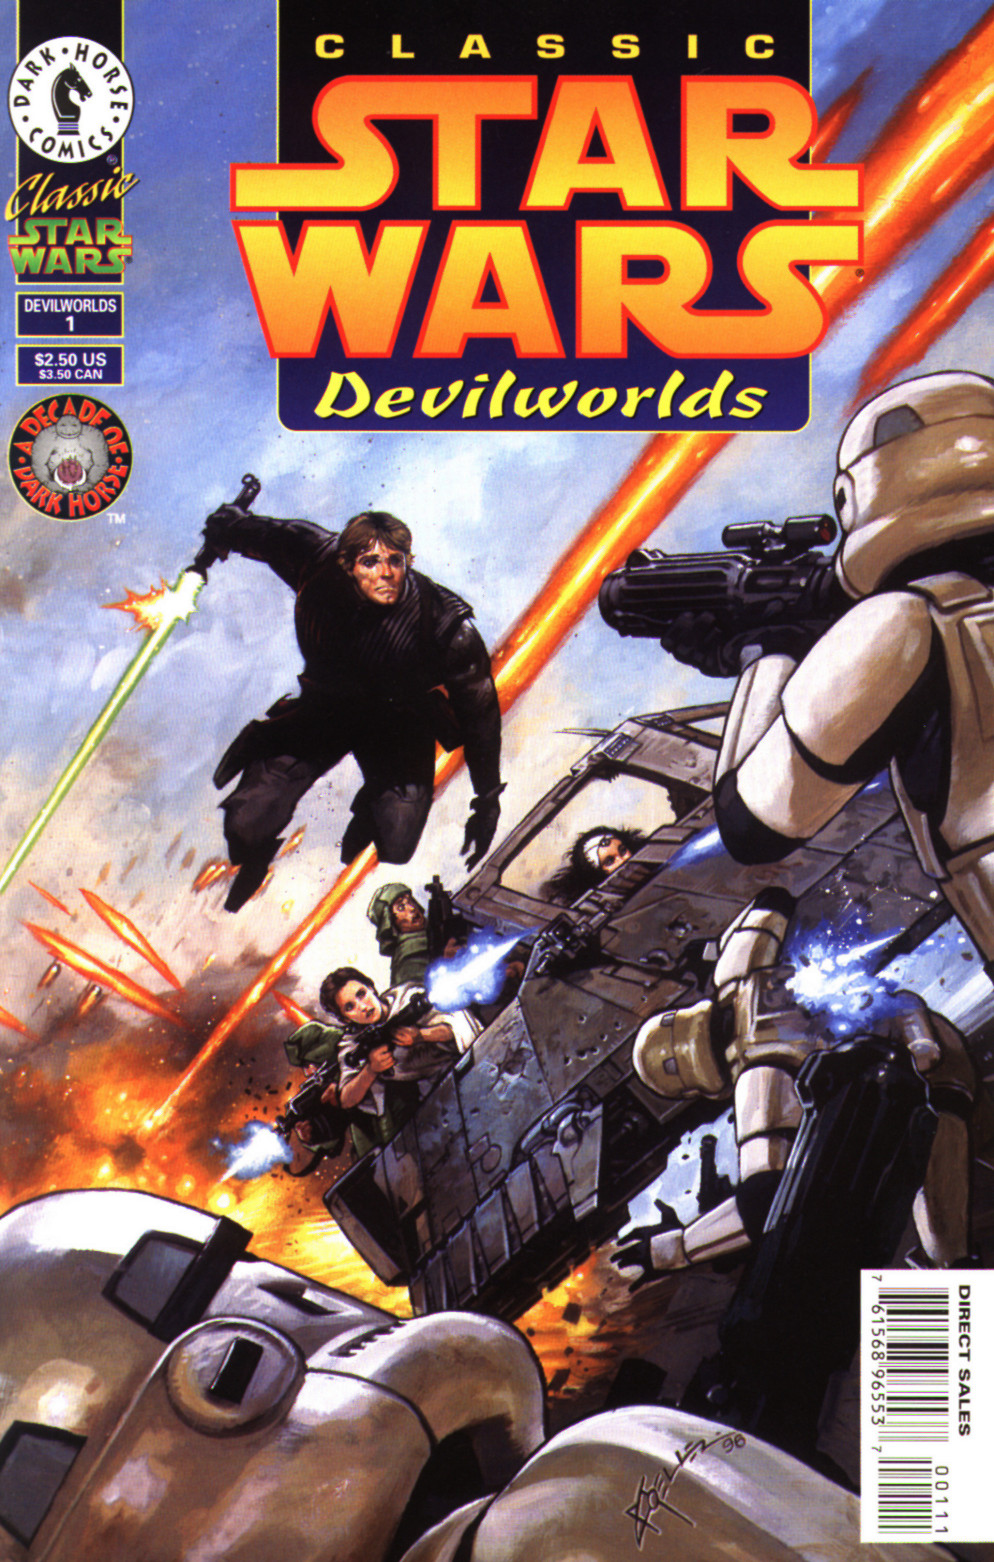 Read online Classic Star Wars: Devilworlds comic -  Issue #1 - 1